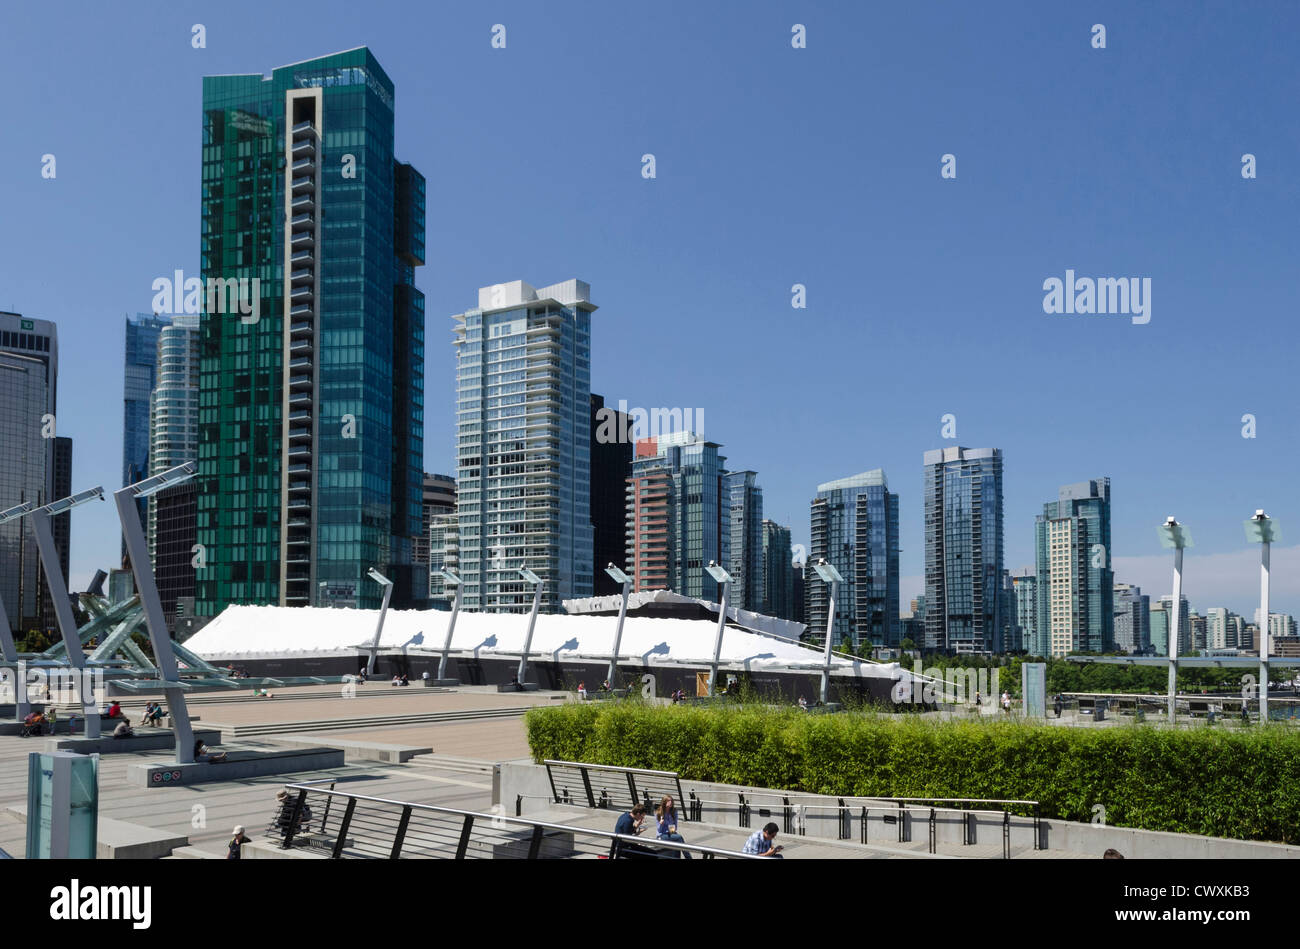 New apartments and office blocks along West Cordova Street and Harbour Green Park, Vancouver Stock Photo